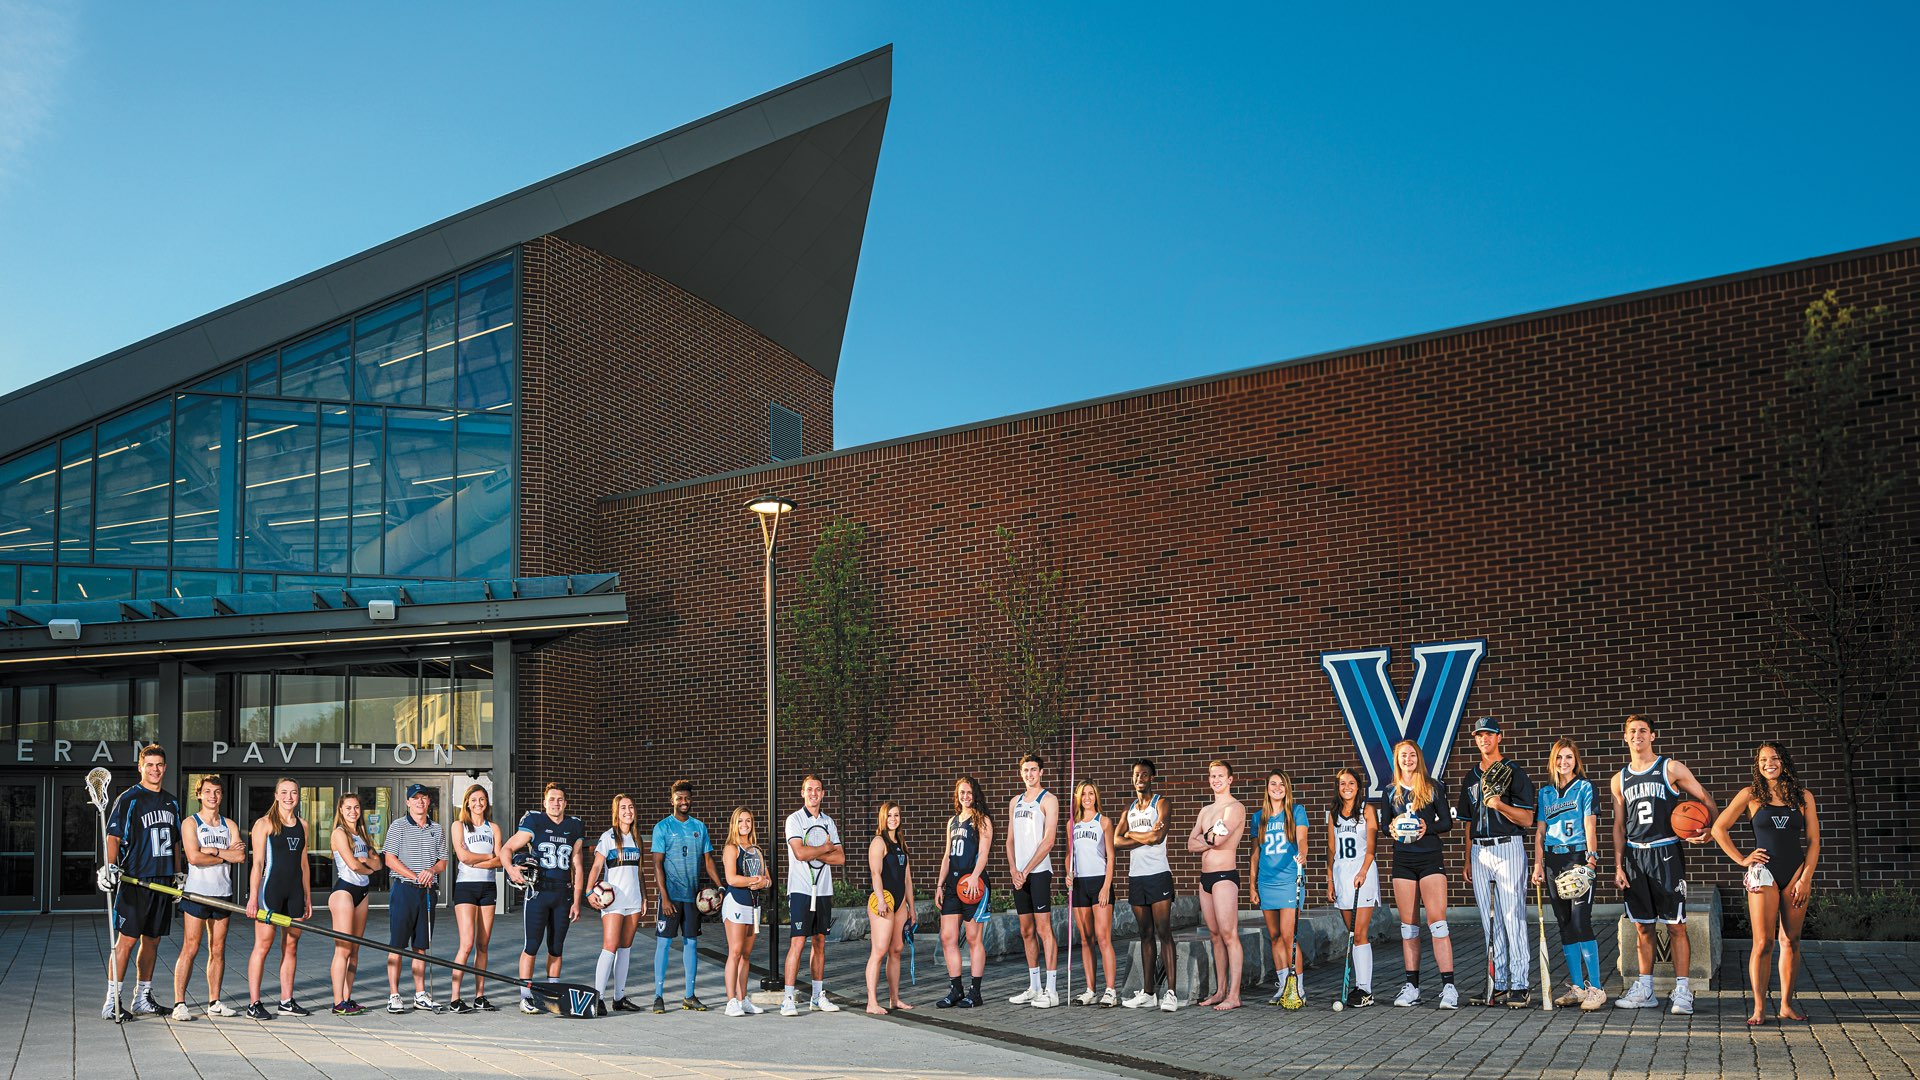 Lined up in front of Finneran Pavilion, 24 Villanova student-athletes in uniform representing various sports